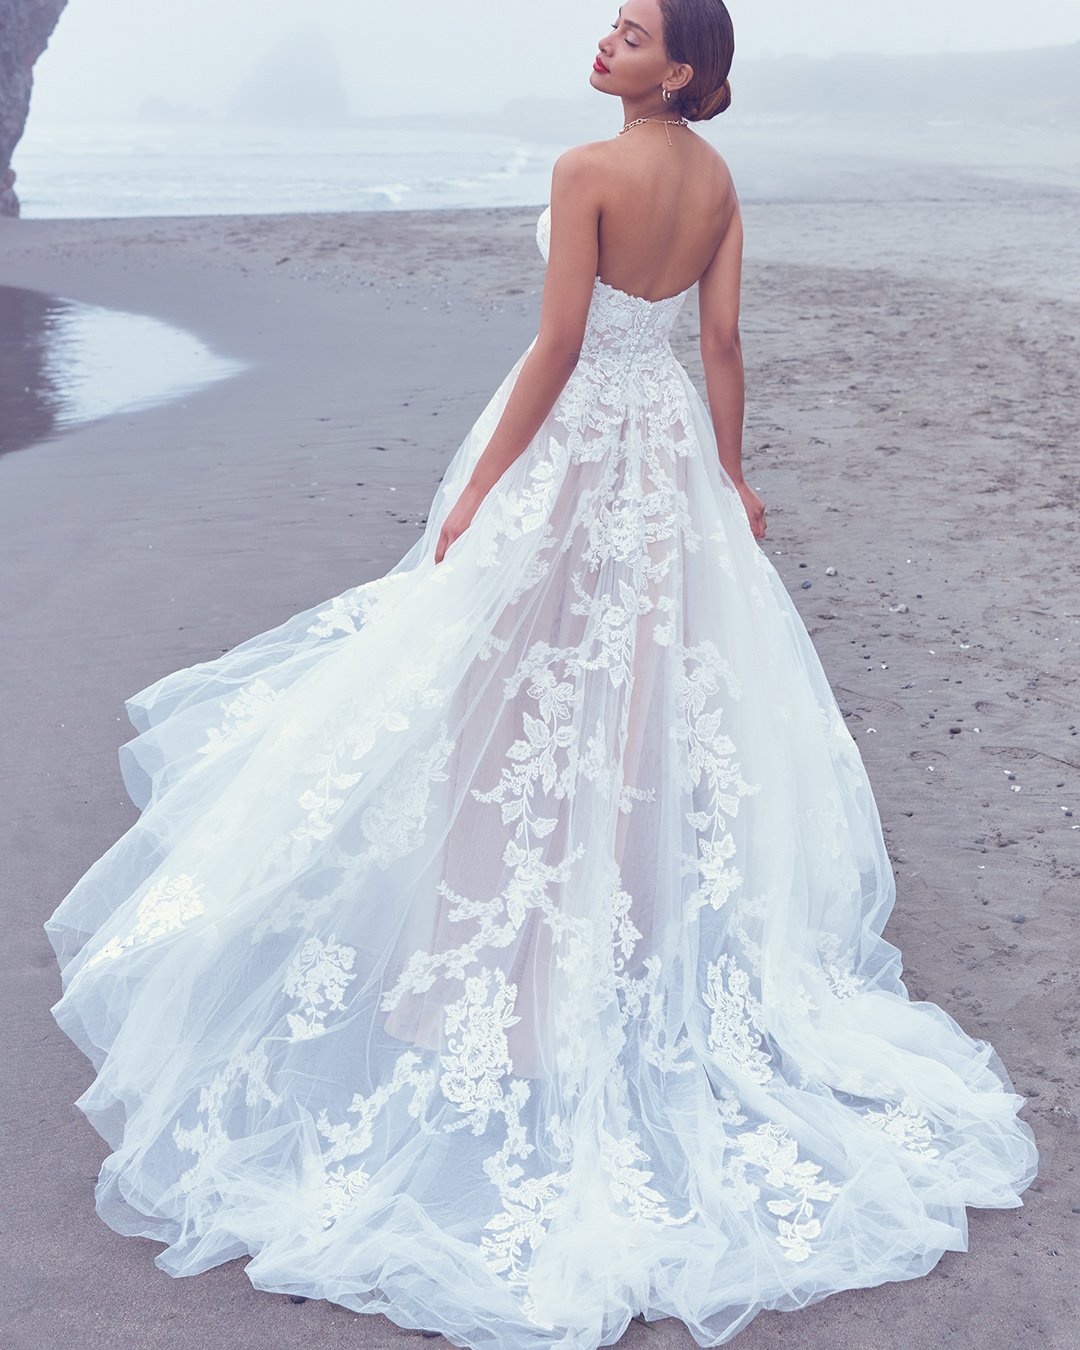 beach wedding dresses a line low back lace train maggiesottero